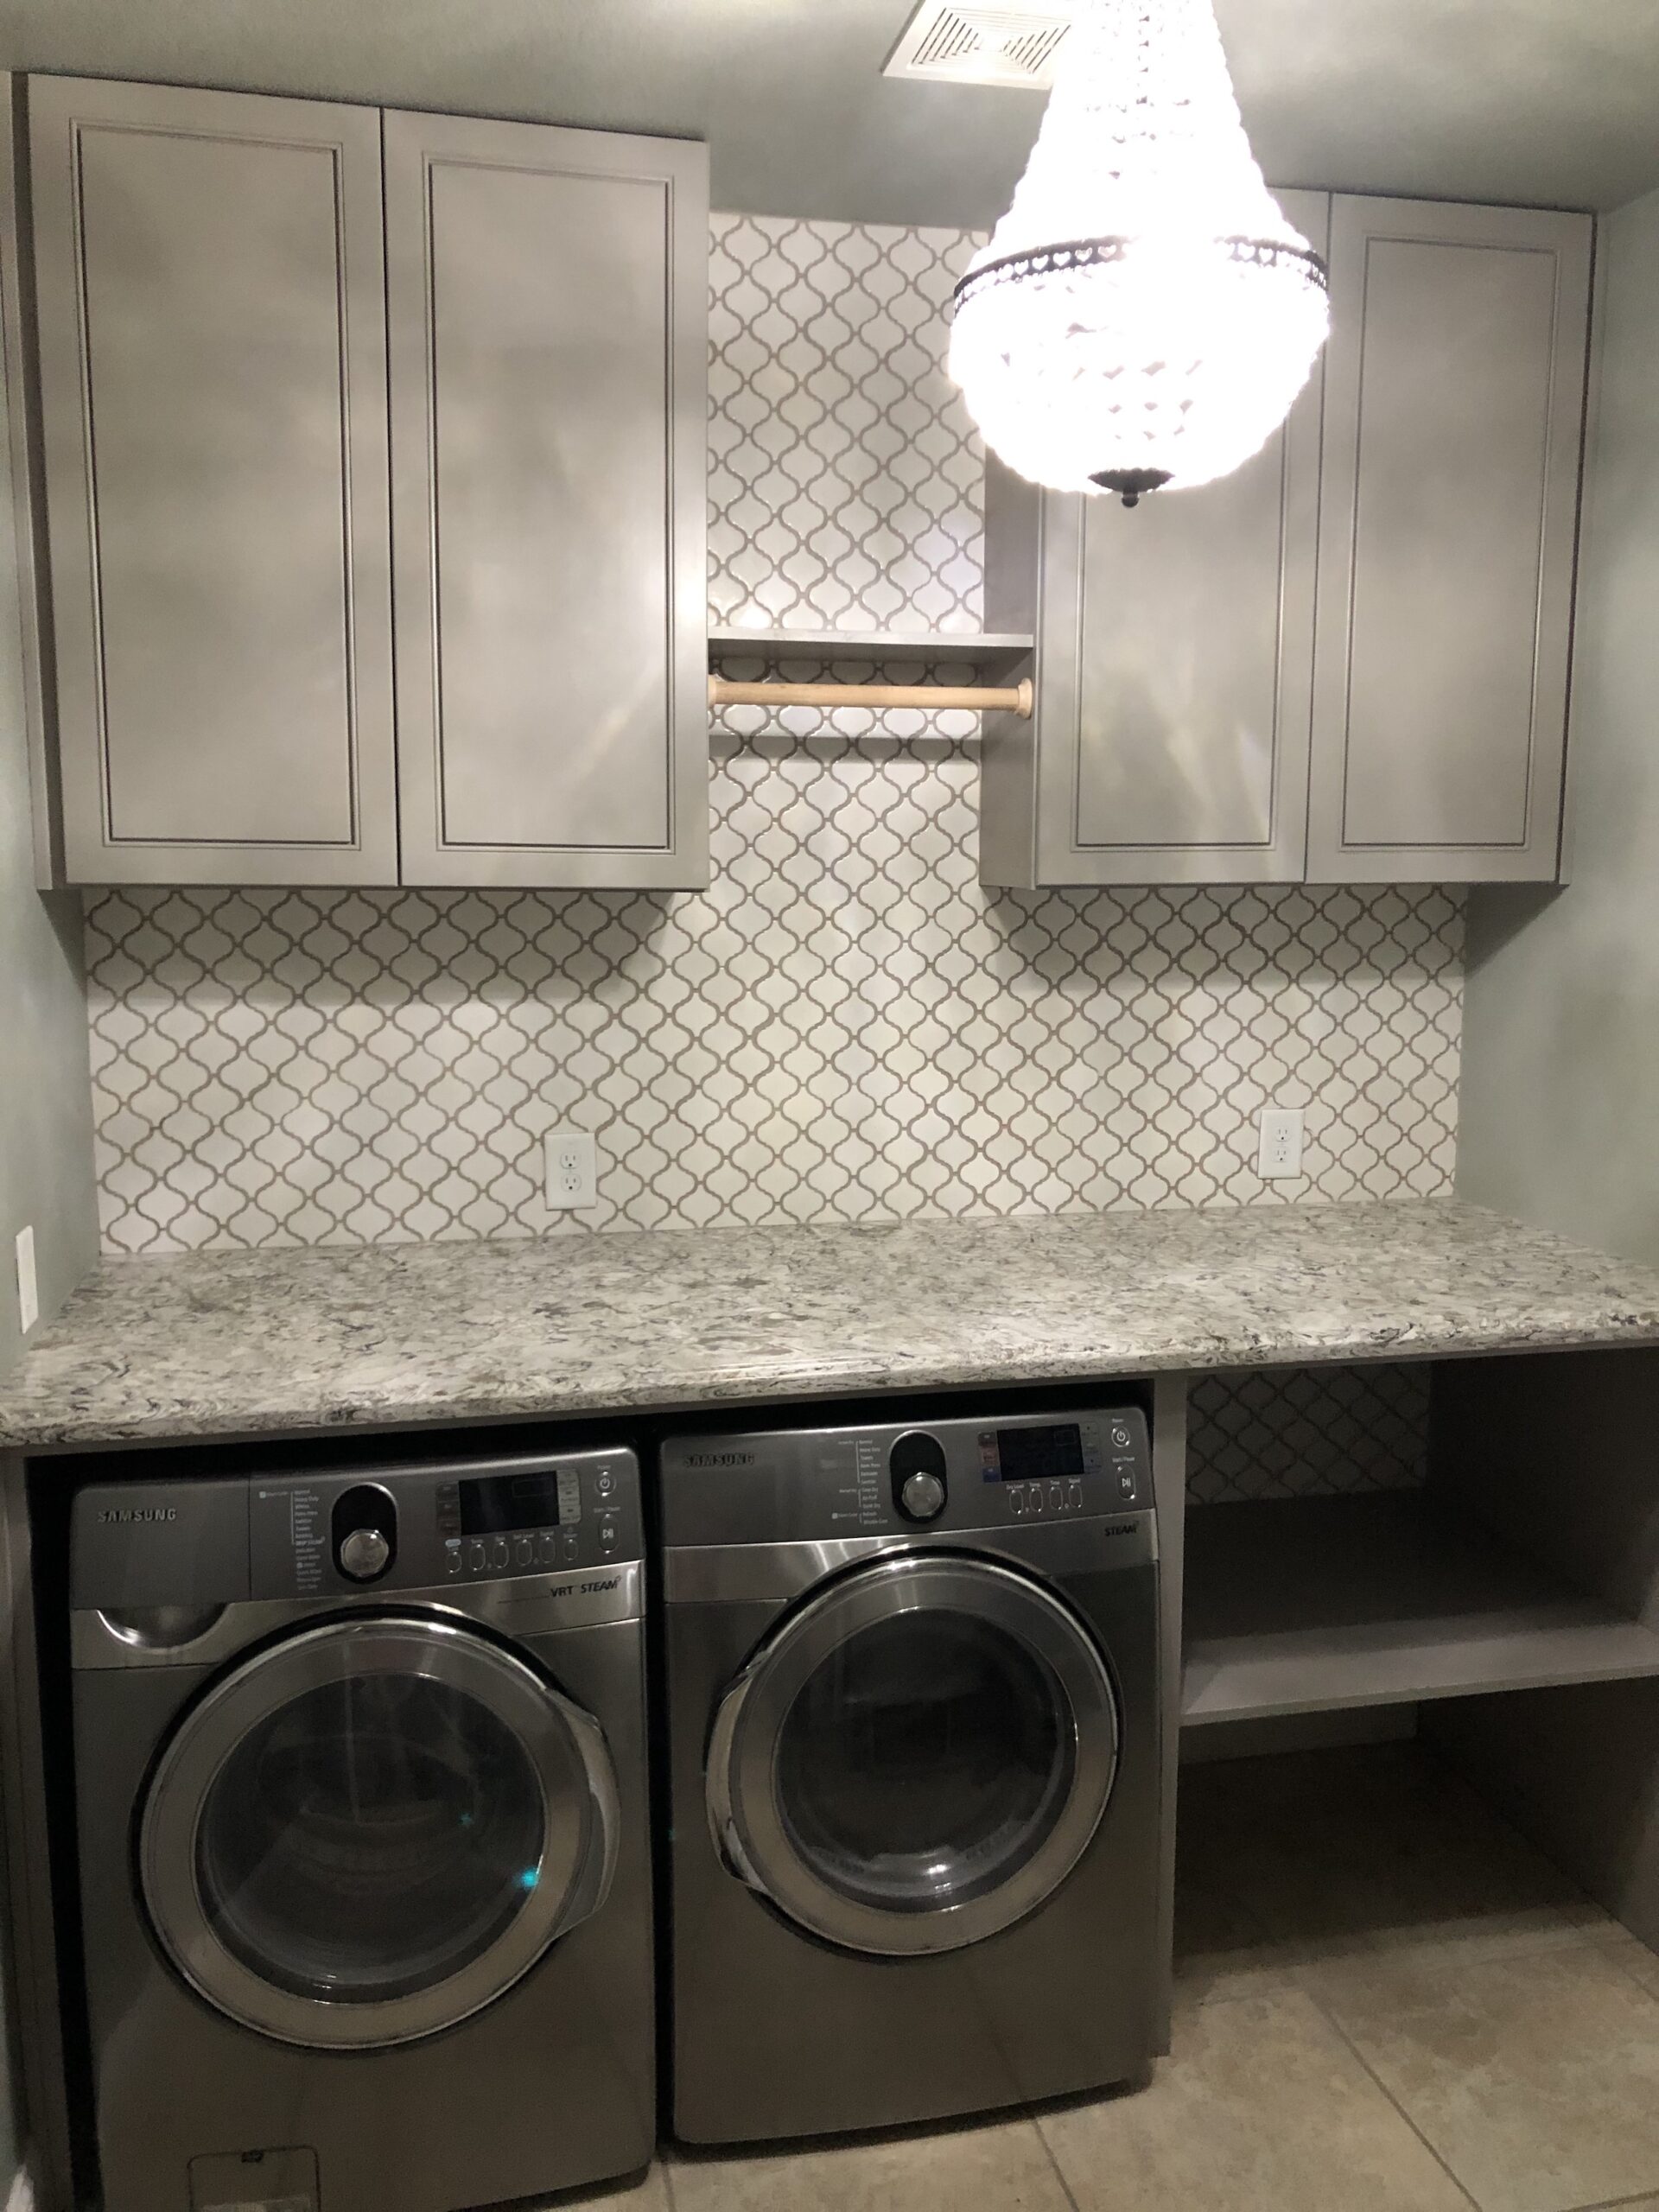 laundry room remodeling adding countertop and cabinetry